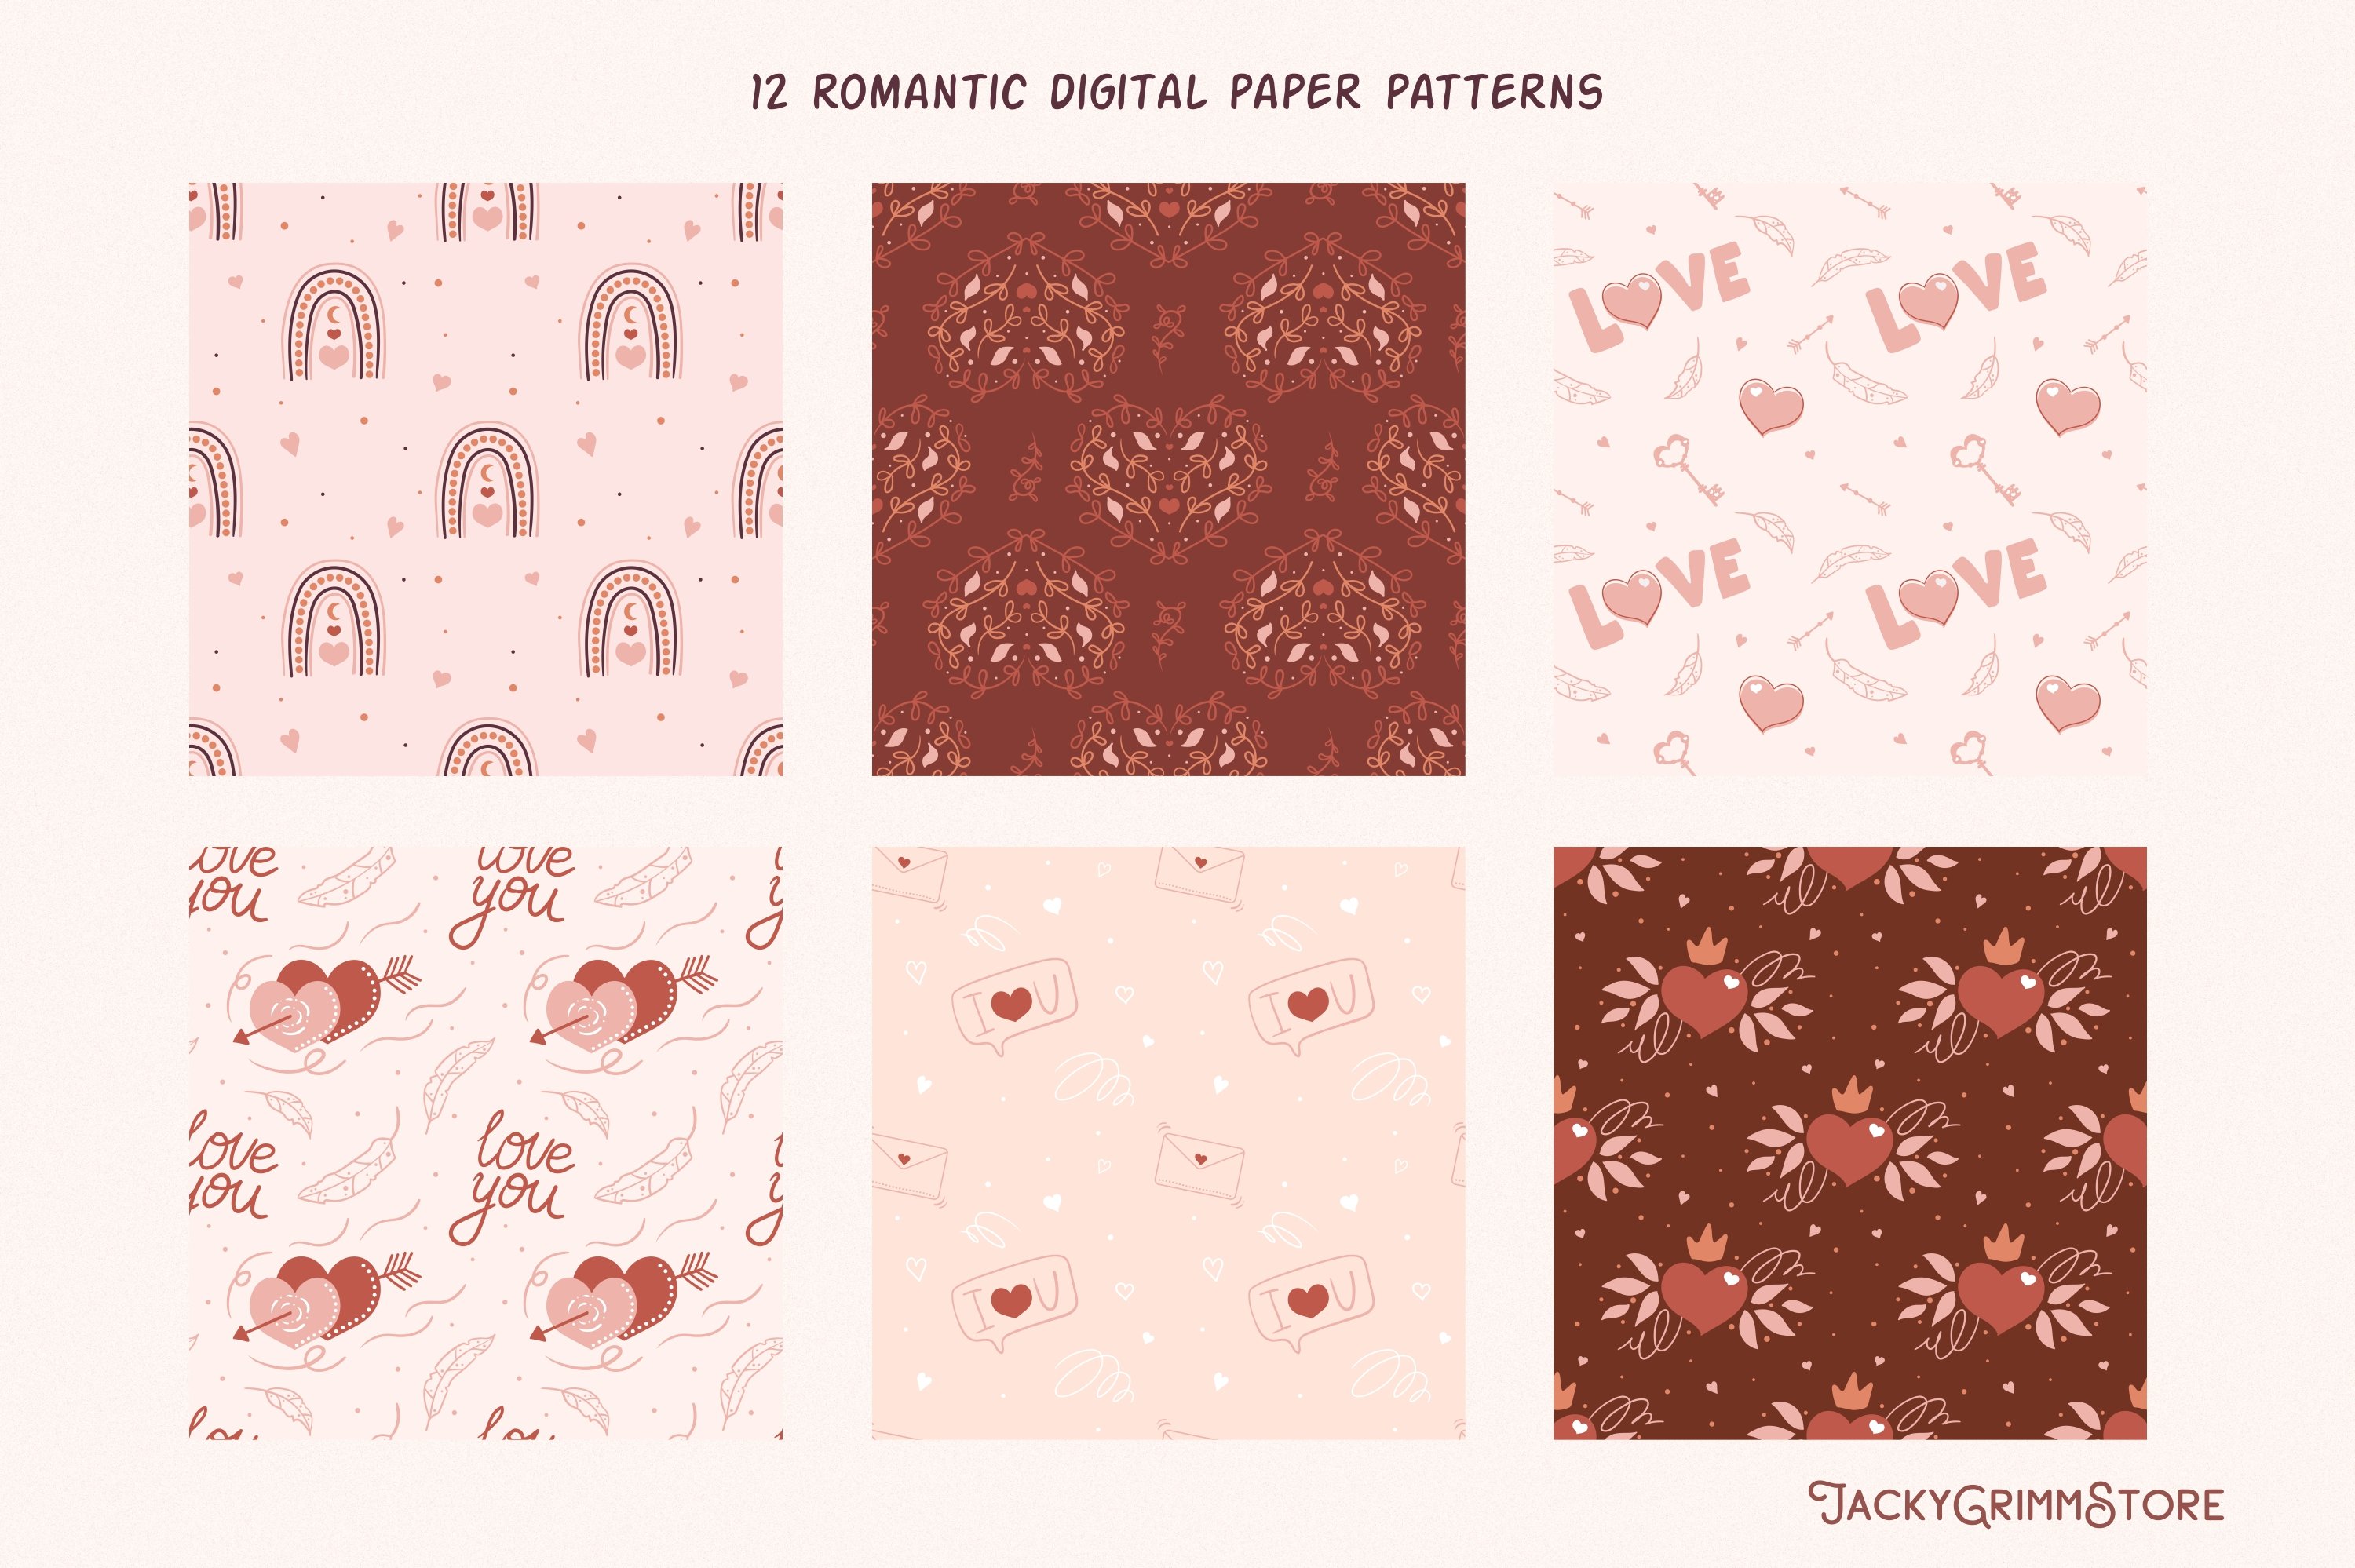 So cool warm patterns with the love prints.